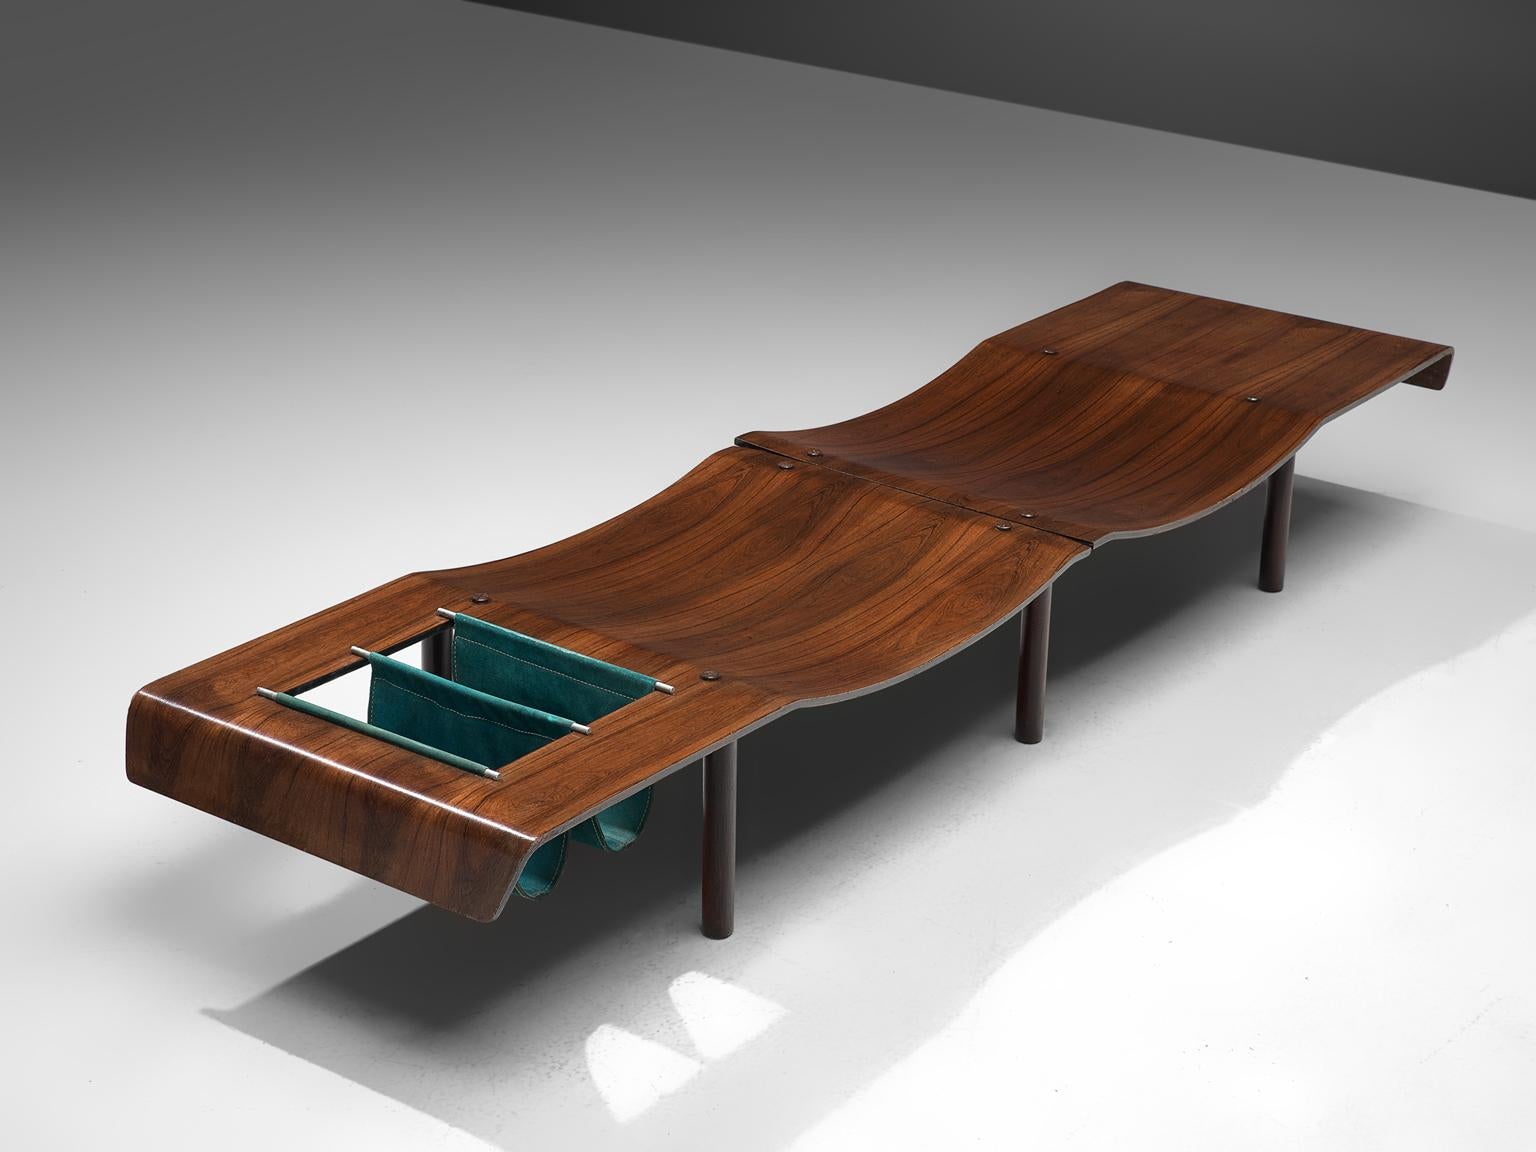 Brazilian rosewood bench, metal en leather, Brazil, 1959-1969.

This Brazilian rosewood bench features molded and curved seats, placed in a symmetrical, repeating way that results in an organic, aesthetic wave. The organic, warm toned wooden bench